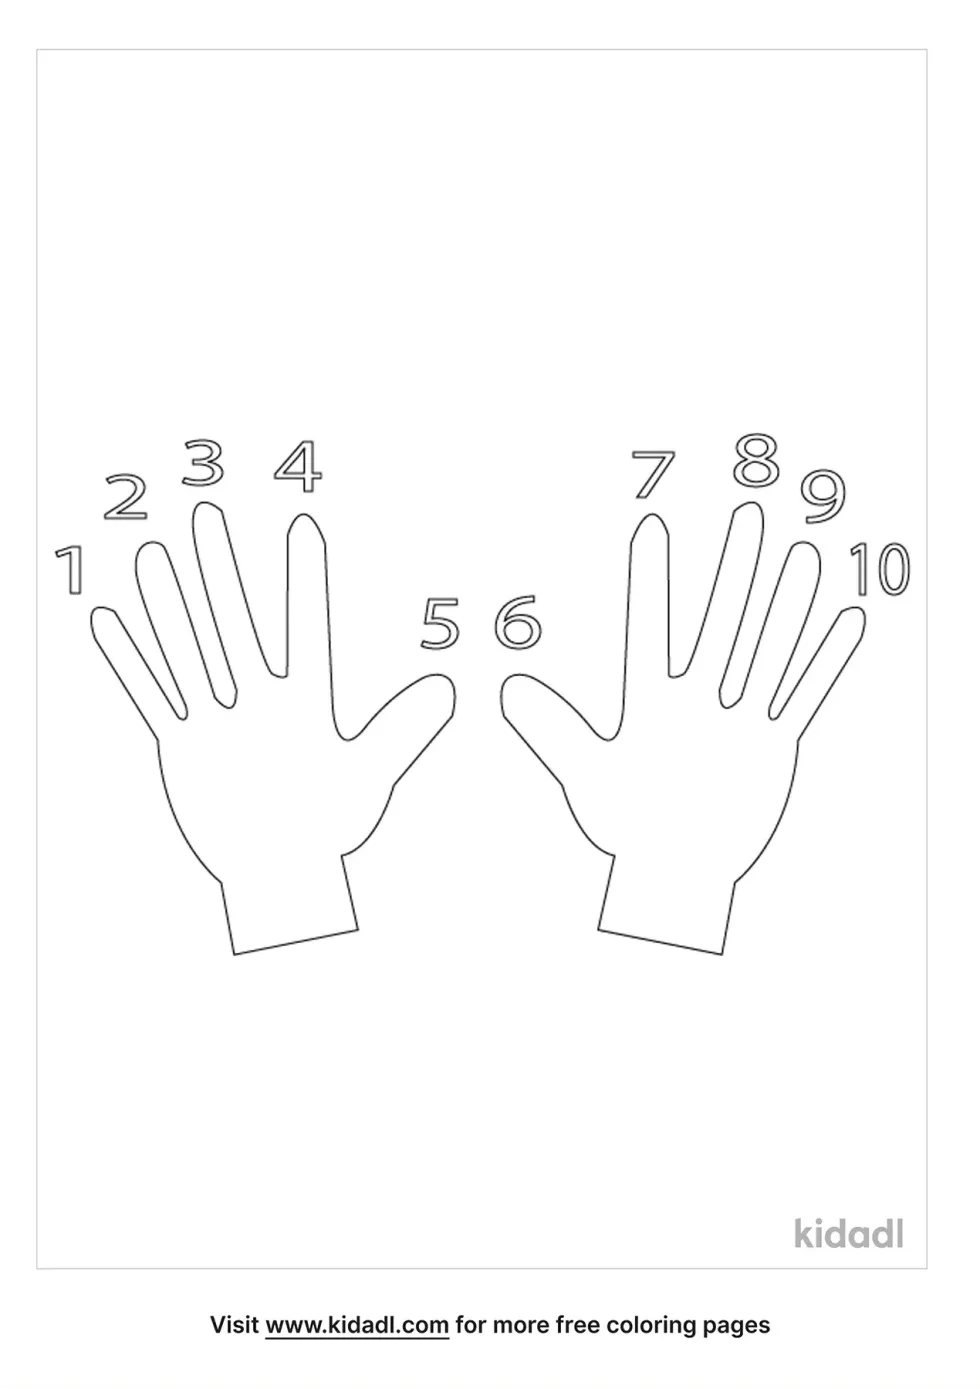 Hand Counting